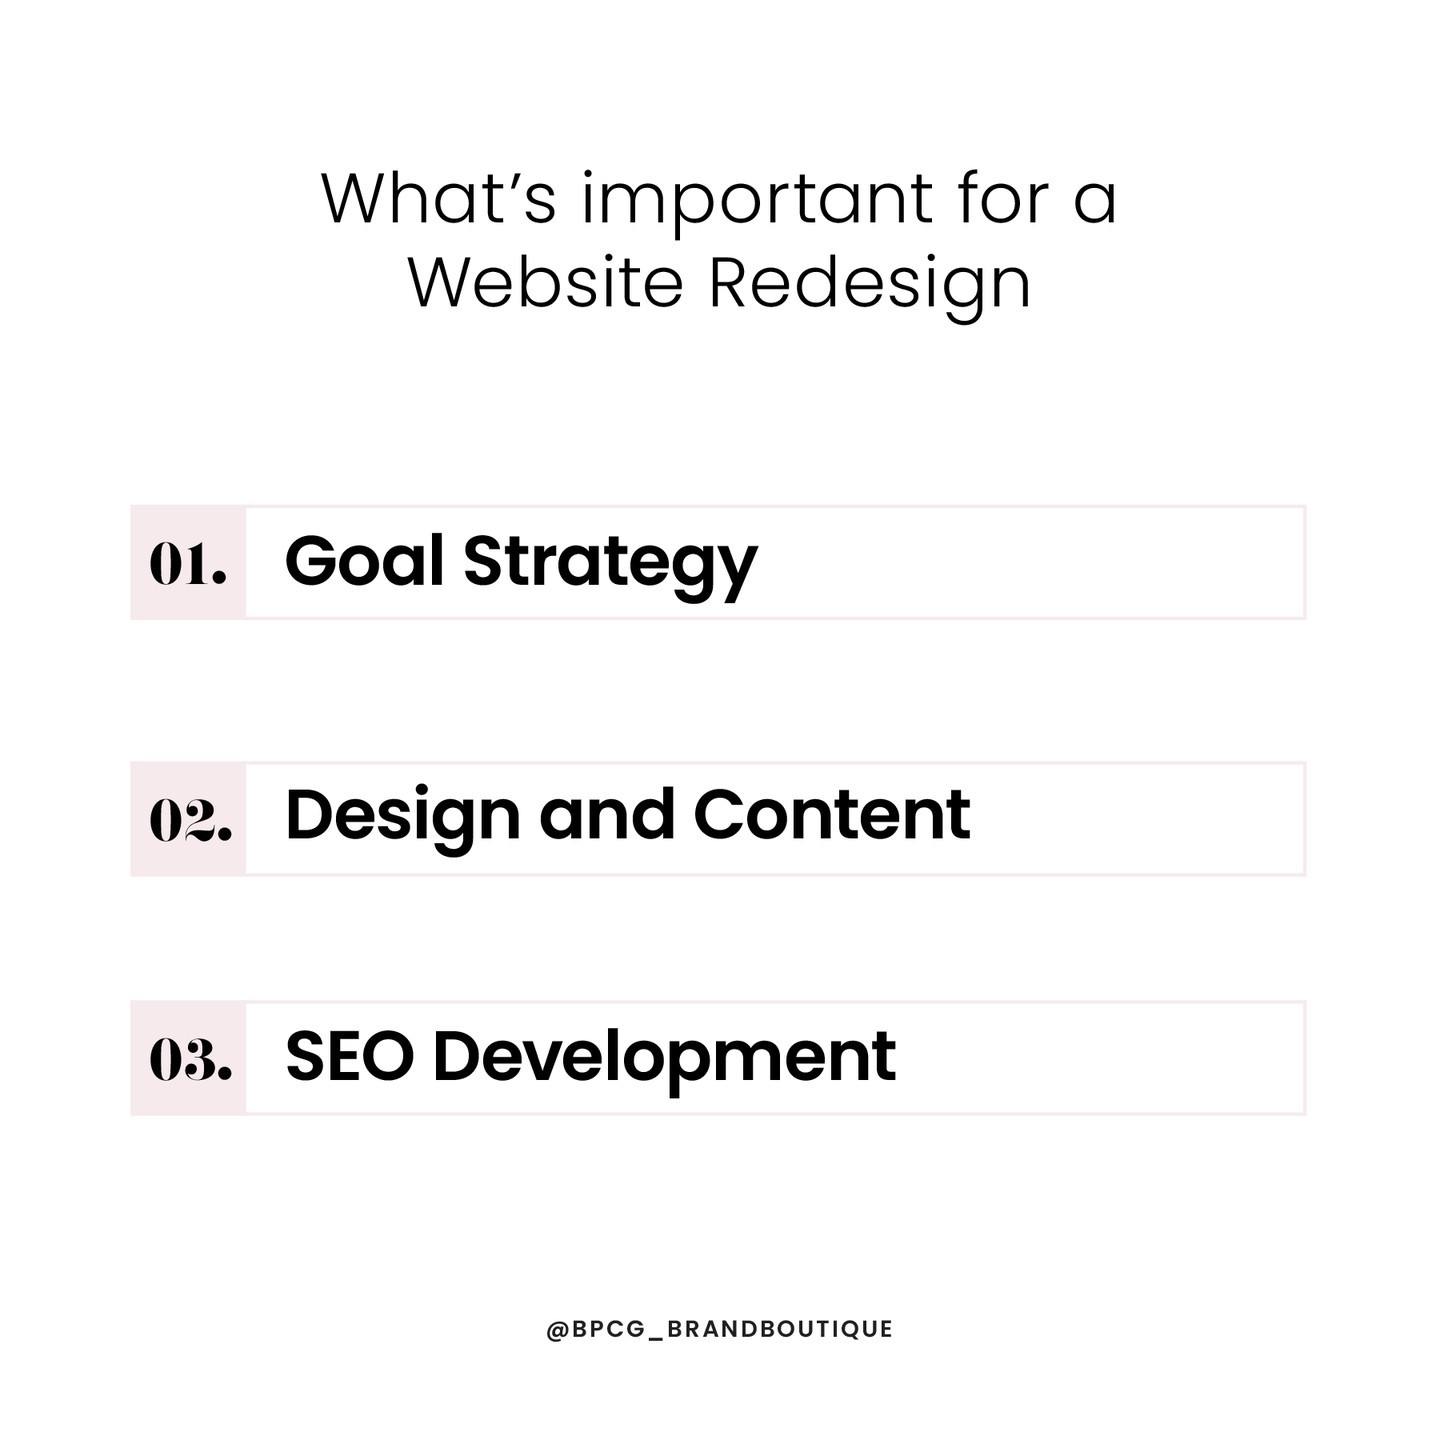 Thinking of a Website overhaul?

Getting sick & tired of your website not performing, engaging or working properly?

It might be time to consider a website design.

But - before you go shutting it down, deleting or trashing it, you need to grab some things.

✔️ copy and paste all content into a doc, there might be good stuff in there to repurpose, especially blogs

✔️ save all imagery

✔️ take screenshots and video recordings

✔️ track analytics or keywords (and copy those down), what was working to filter or bring clients to your website

✔️ if you're not switching platforms - keep all these pages until you are absolutely ready to unveil

The only way this project will be a nightmare is if you don't plan, so let's get started:
1. Goal Strategy: 
- What are your goals and must-haves for the website
- How will you utilize your brand foundation for those goals
- Is everyone on the same page about these goals, audits and continuing work

2. Design and Content
- What elements of your brand will you need
- Go deep, develop content that speaks to you as a brand and speaks with your ideal client
- What call to actions or next steps are needed from a viewer standpoint

3. SEO and Audit
- Put yourself in your viewer's shoes: what would they search for, what are they experiencing, what will help them book your service or buy your product faster - use these phrases or keywords
- Place meta tags on images and inside pages
- Put together a list of what will need to be tracked each month to match your (#1) goals!! Rinse and repeat.

Do what you can to make the redesign process go smoothly and don't lose sight of the strategy you need to ensure that your website actually delivers the results you’re looking for.

🖐️HIGH FIVE THE PRE-PLAN PROCESS!!

 #webdesigner #webdevelopment #websitebuilder #websitedesigner #webdesign #calltoaction #websitestrategy #wordpresswebsite #squarespacewebsite #brand #brandstrategy #visualidentity #brandstrategist #kcwebdesigner #kccreative #kansascitywebsitedesign #websitedesign #webseo #seo #seokc #websiteredesign #websiterefresh #branddesigner #branddesign #branding #brandingkc #branddesignkc #marketingconsultantkc #marketingkc